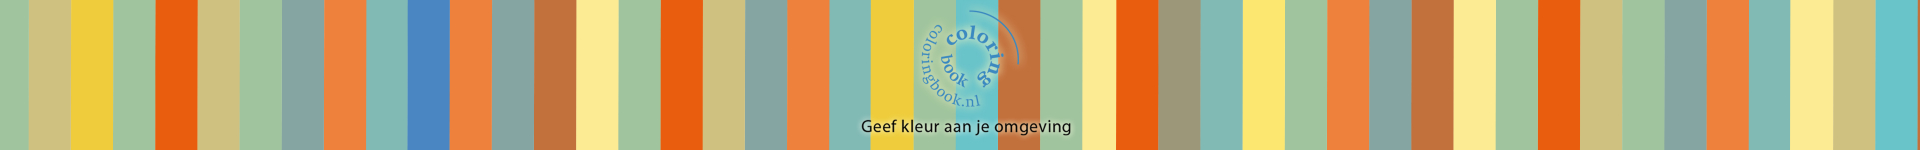 coloringbook.nls achtergrond